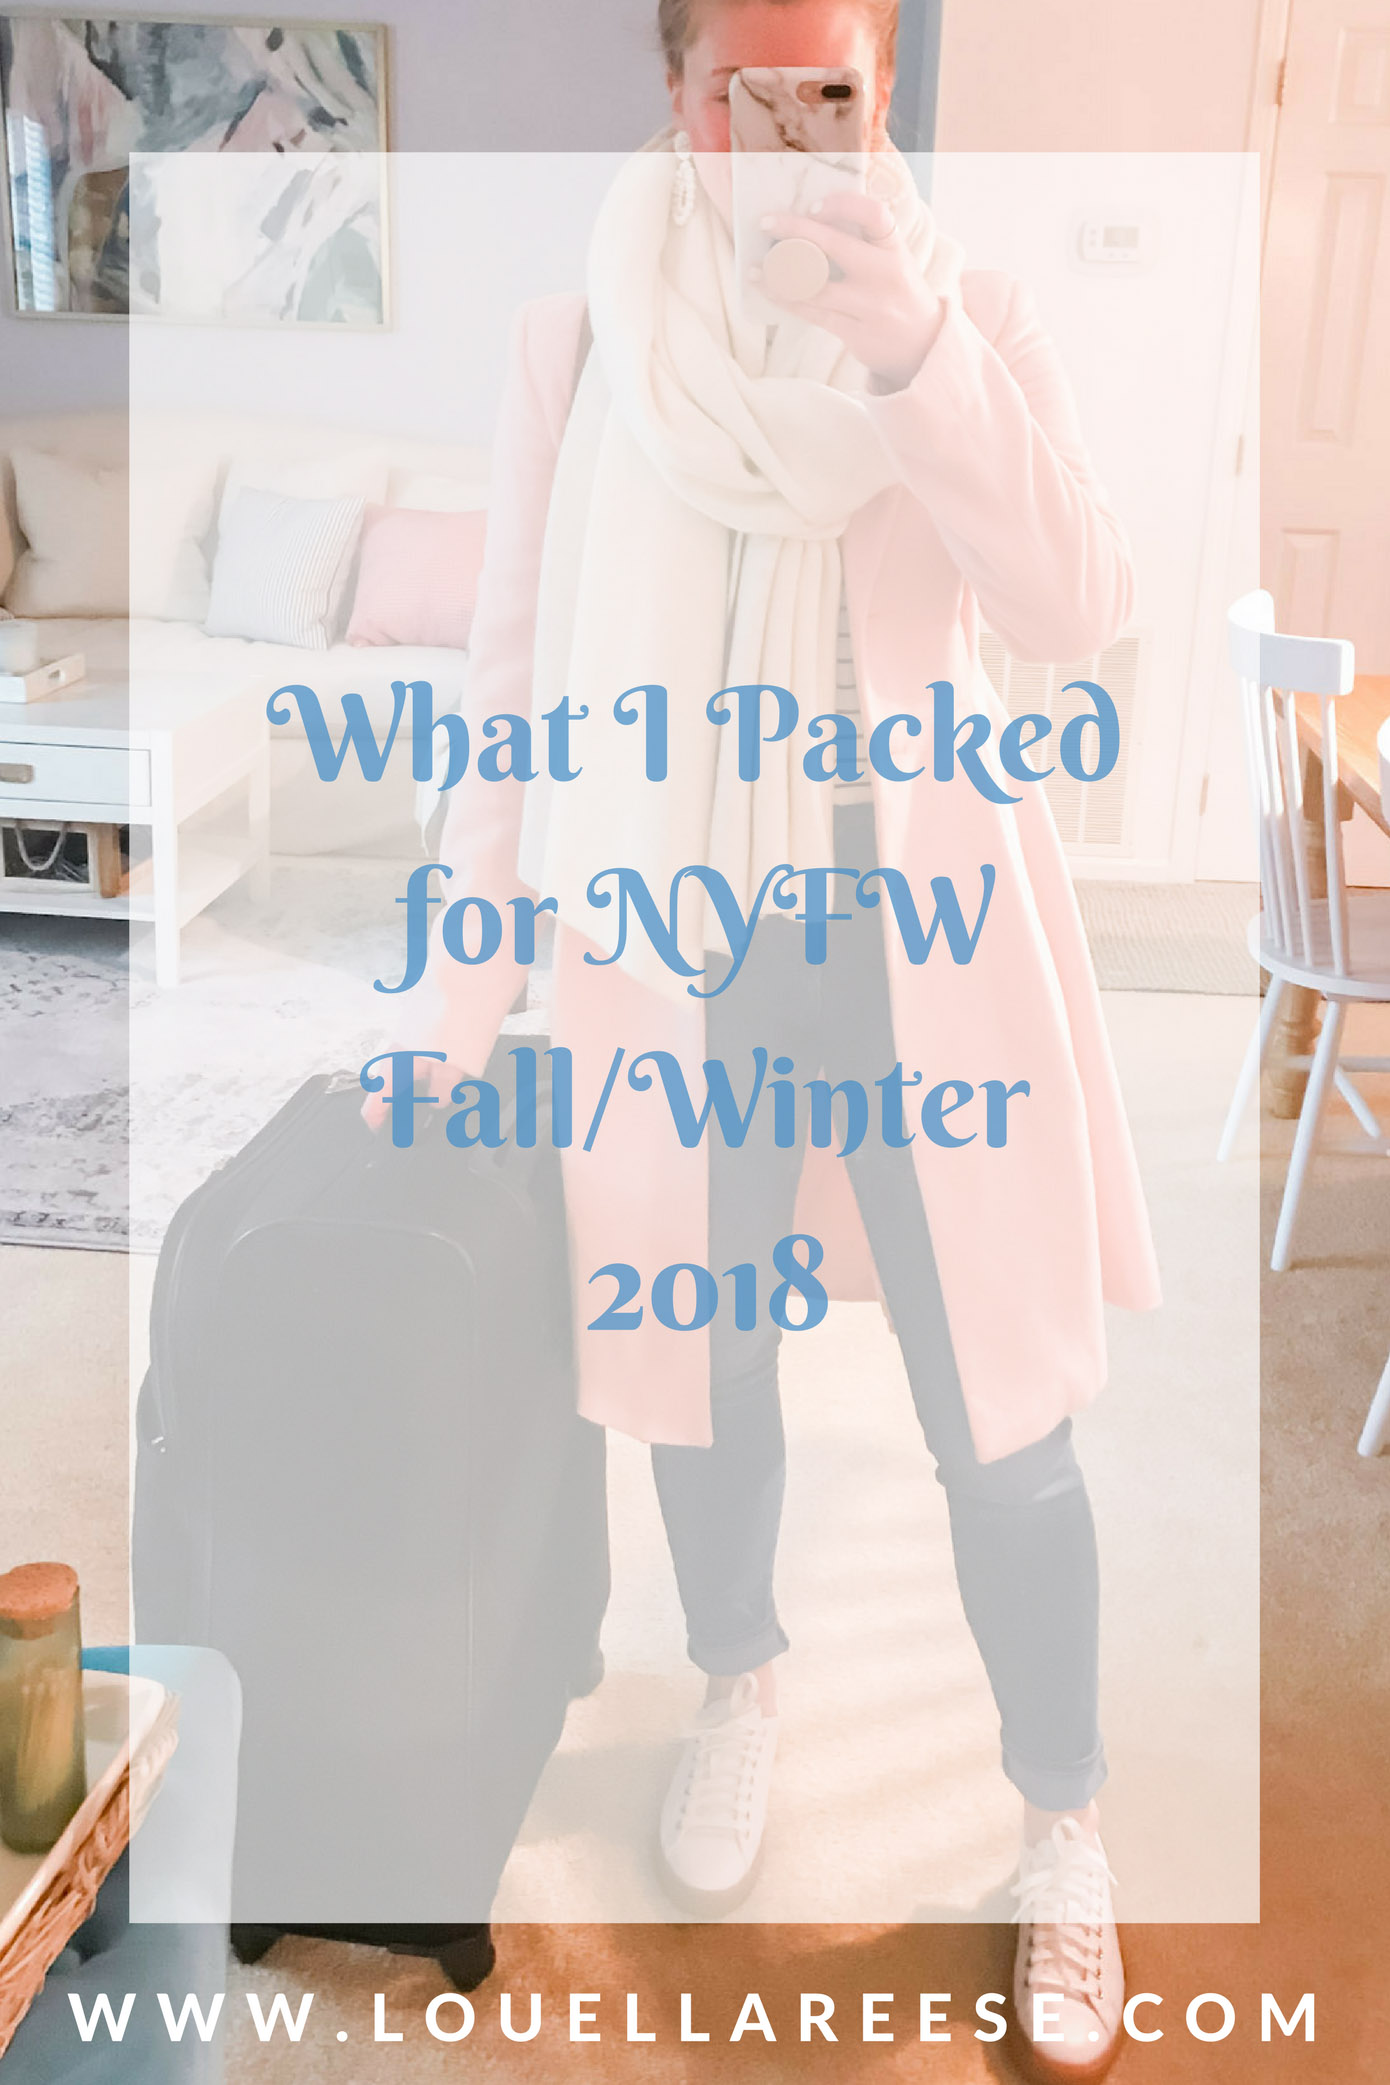 What to Pack for NYFW in February | What I Packed for NYFW | Louella Reese Life & Style Blog 